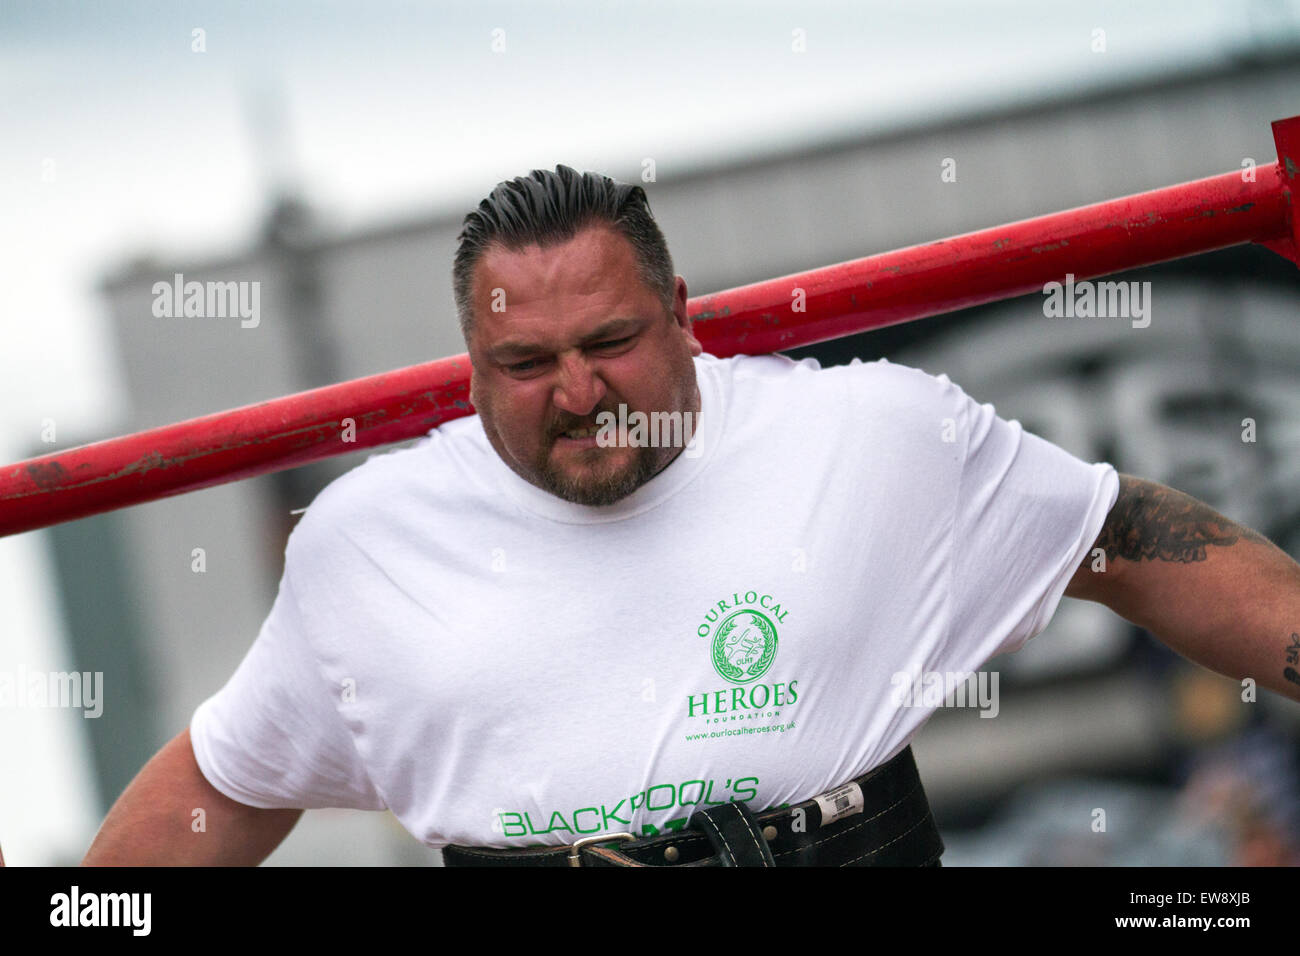 St Johns Square, Blackpool, Lancashire. 20th June, 2015  Dale Peters a weightlifter competitor, facial grimace at the Charity Strongman event which is hosted by Blackpool BID. Blackpool's Strongest Man Competition kicked off National Armed Forces Week in style with Ex Forces Personnel and Civilians alike proving themselves in strong man events to win the male weight lifter coveted, virility, manliness, maleness, vigour, strength, muscularity, ruggedness, toughness, robustness masculinity title. Stock Photo